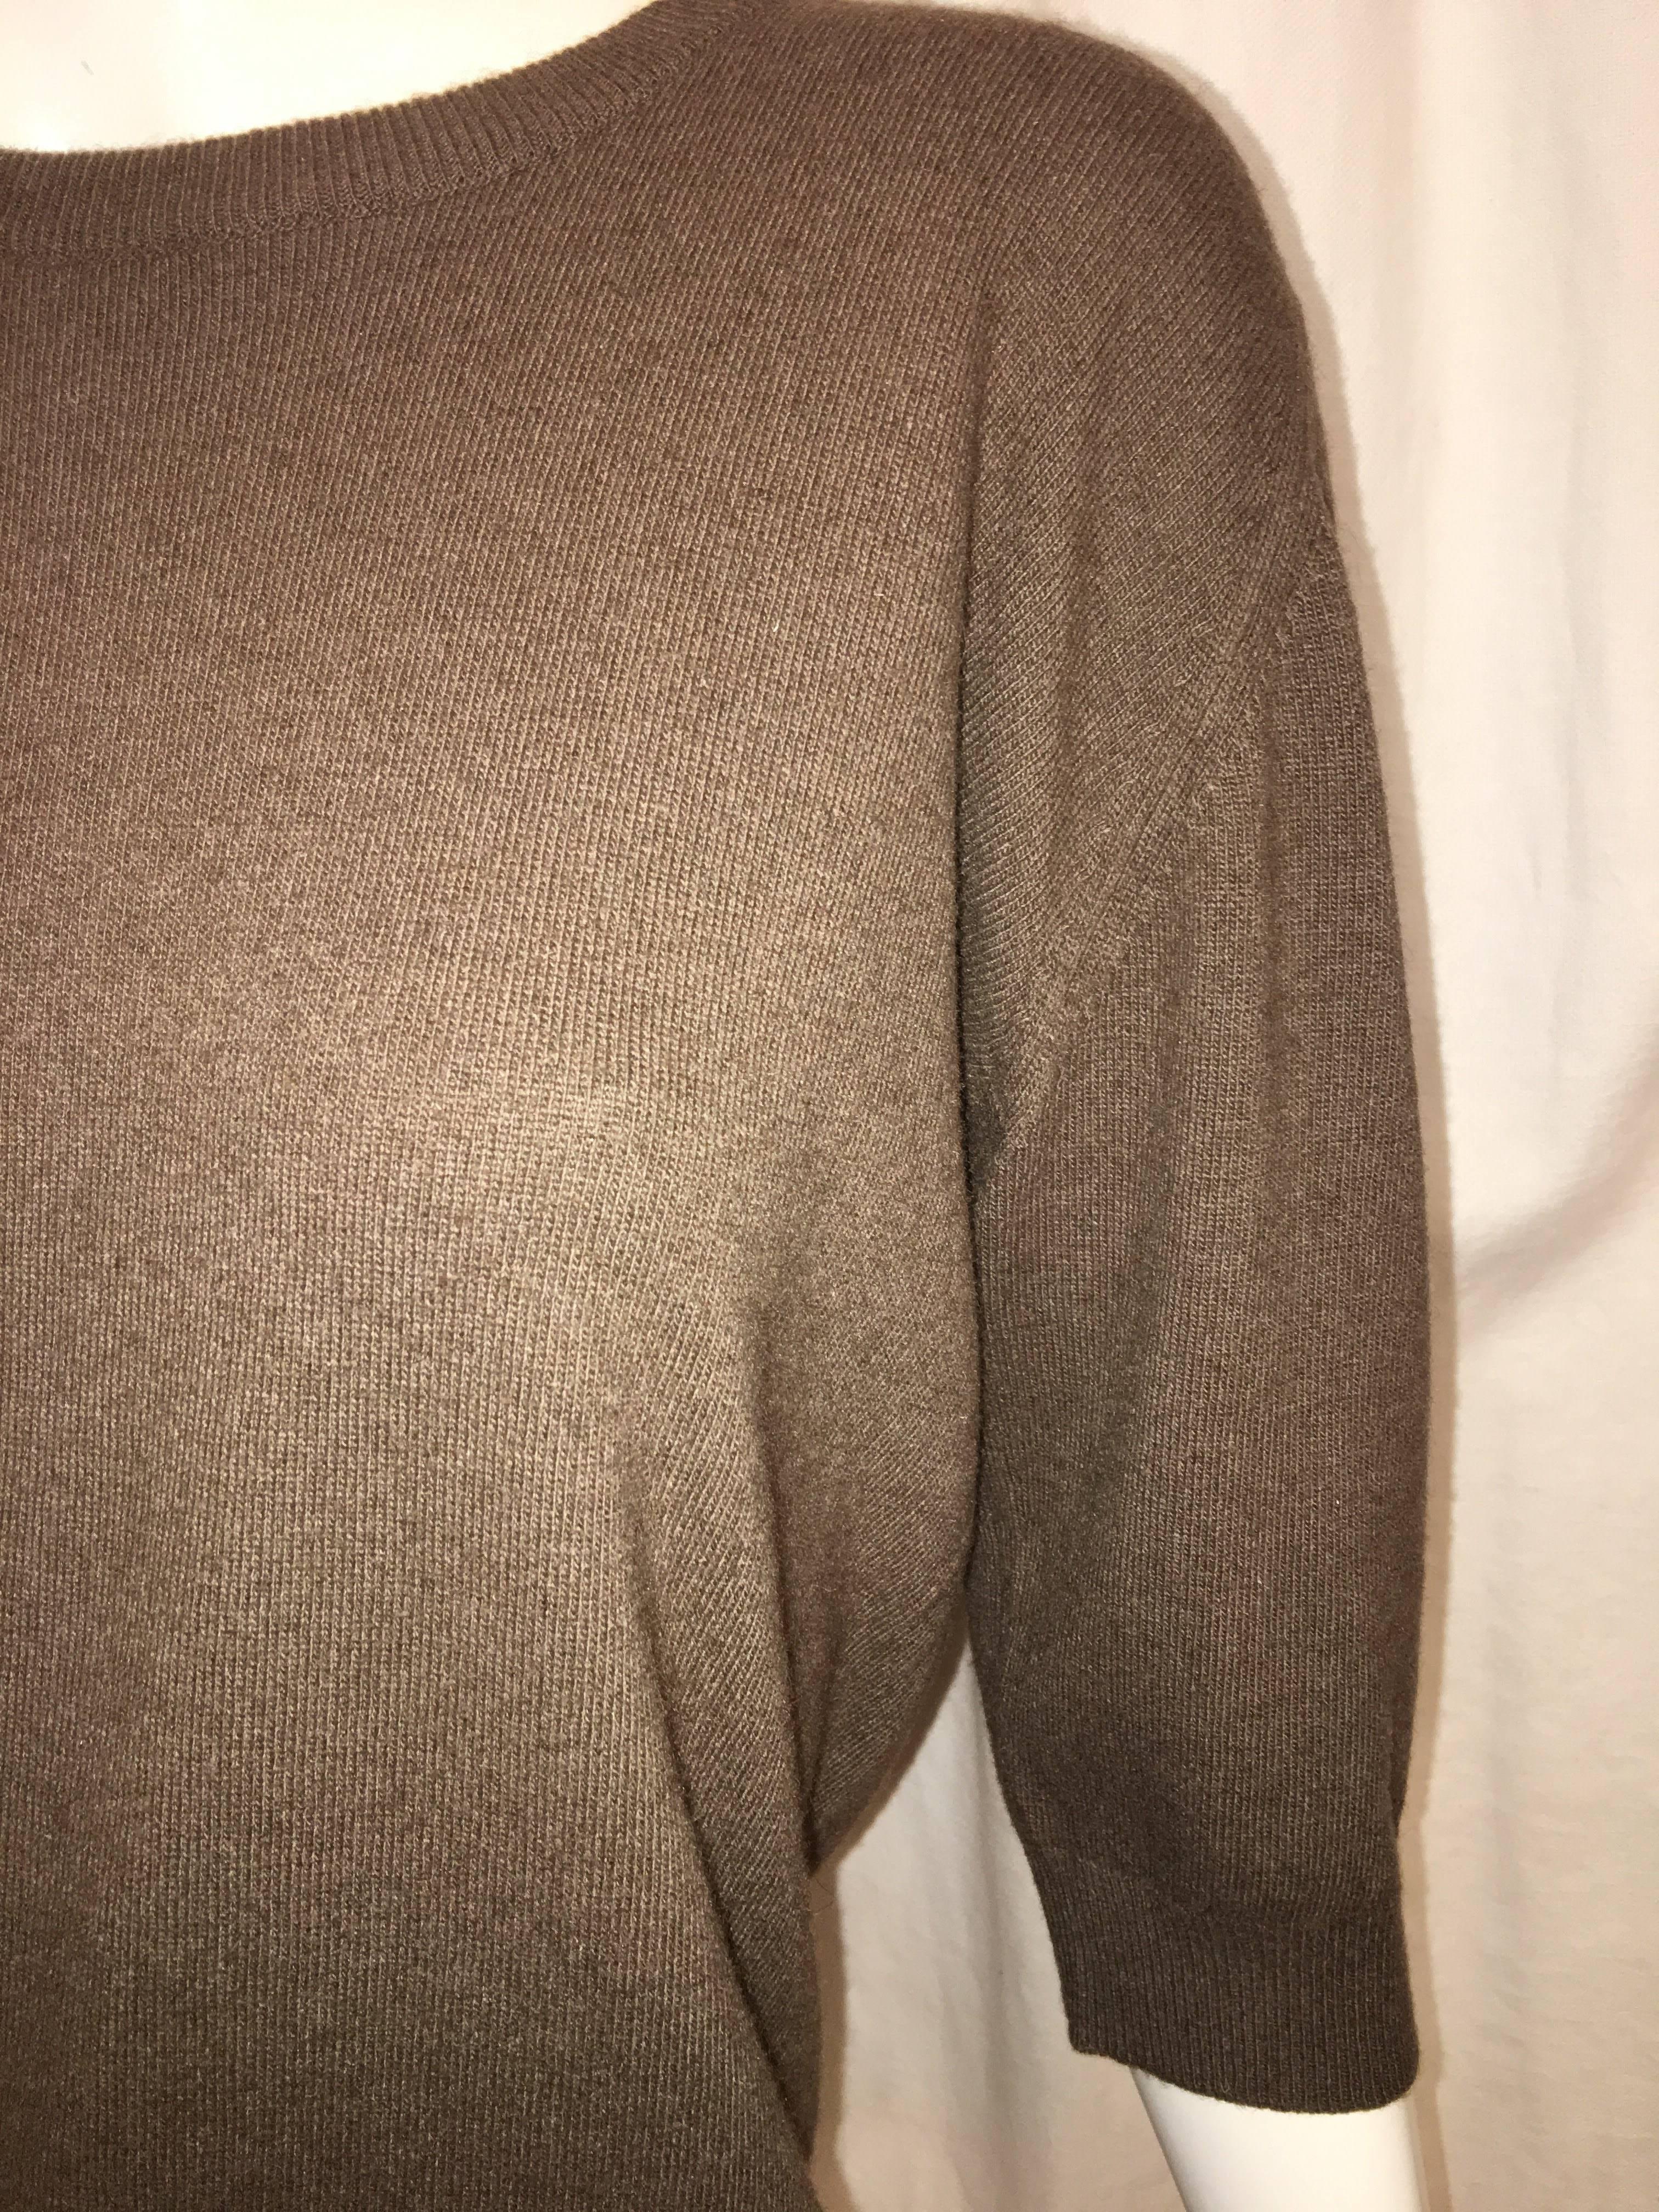 Chanel Cashmere 3/4 Sleeve Sweater with Crew Neck. Circa 1991 